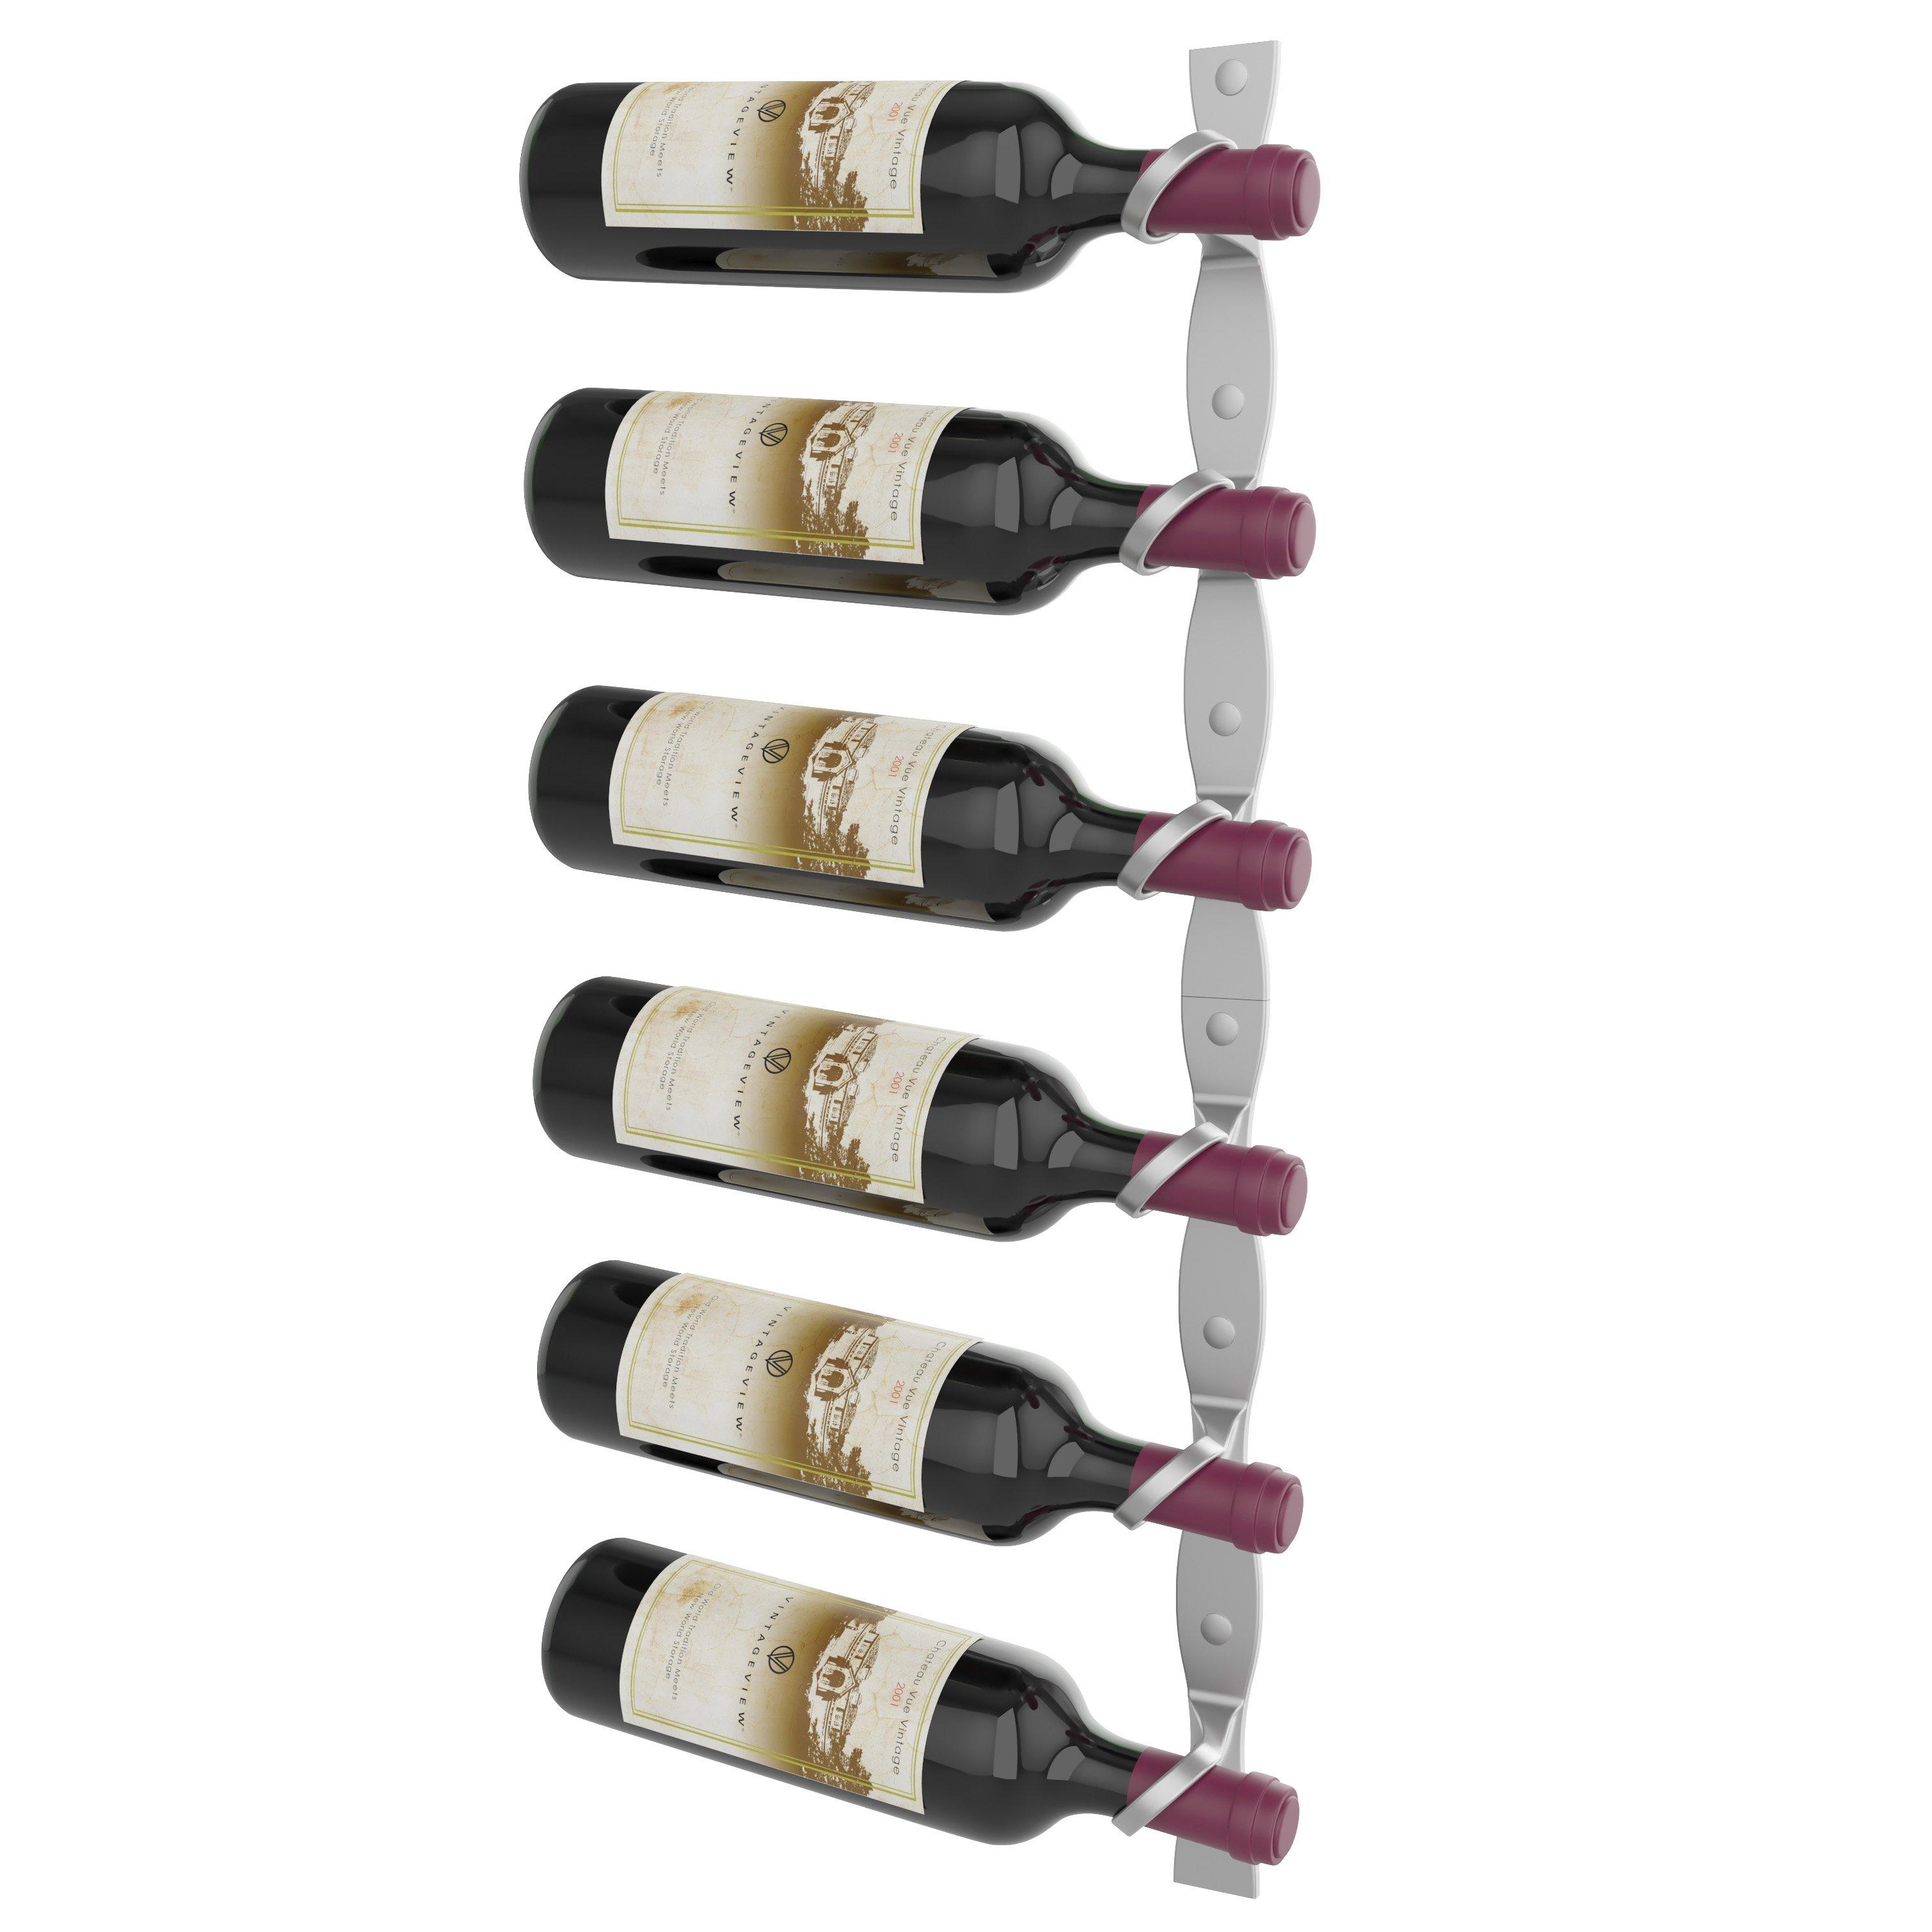 Vintage View R Series Helix Single 30L Kit Wall-Mounted Display Wine Rack (Left Facing Bottles, Cool Gray)